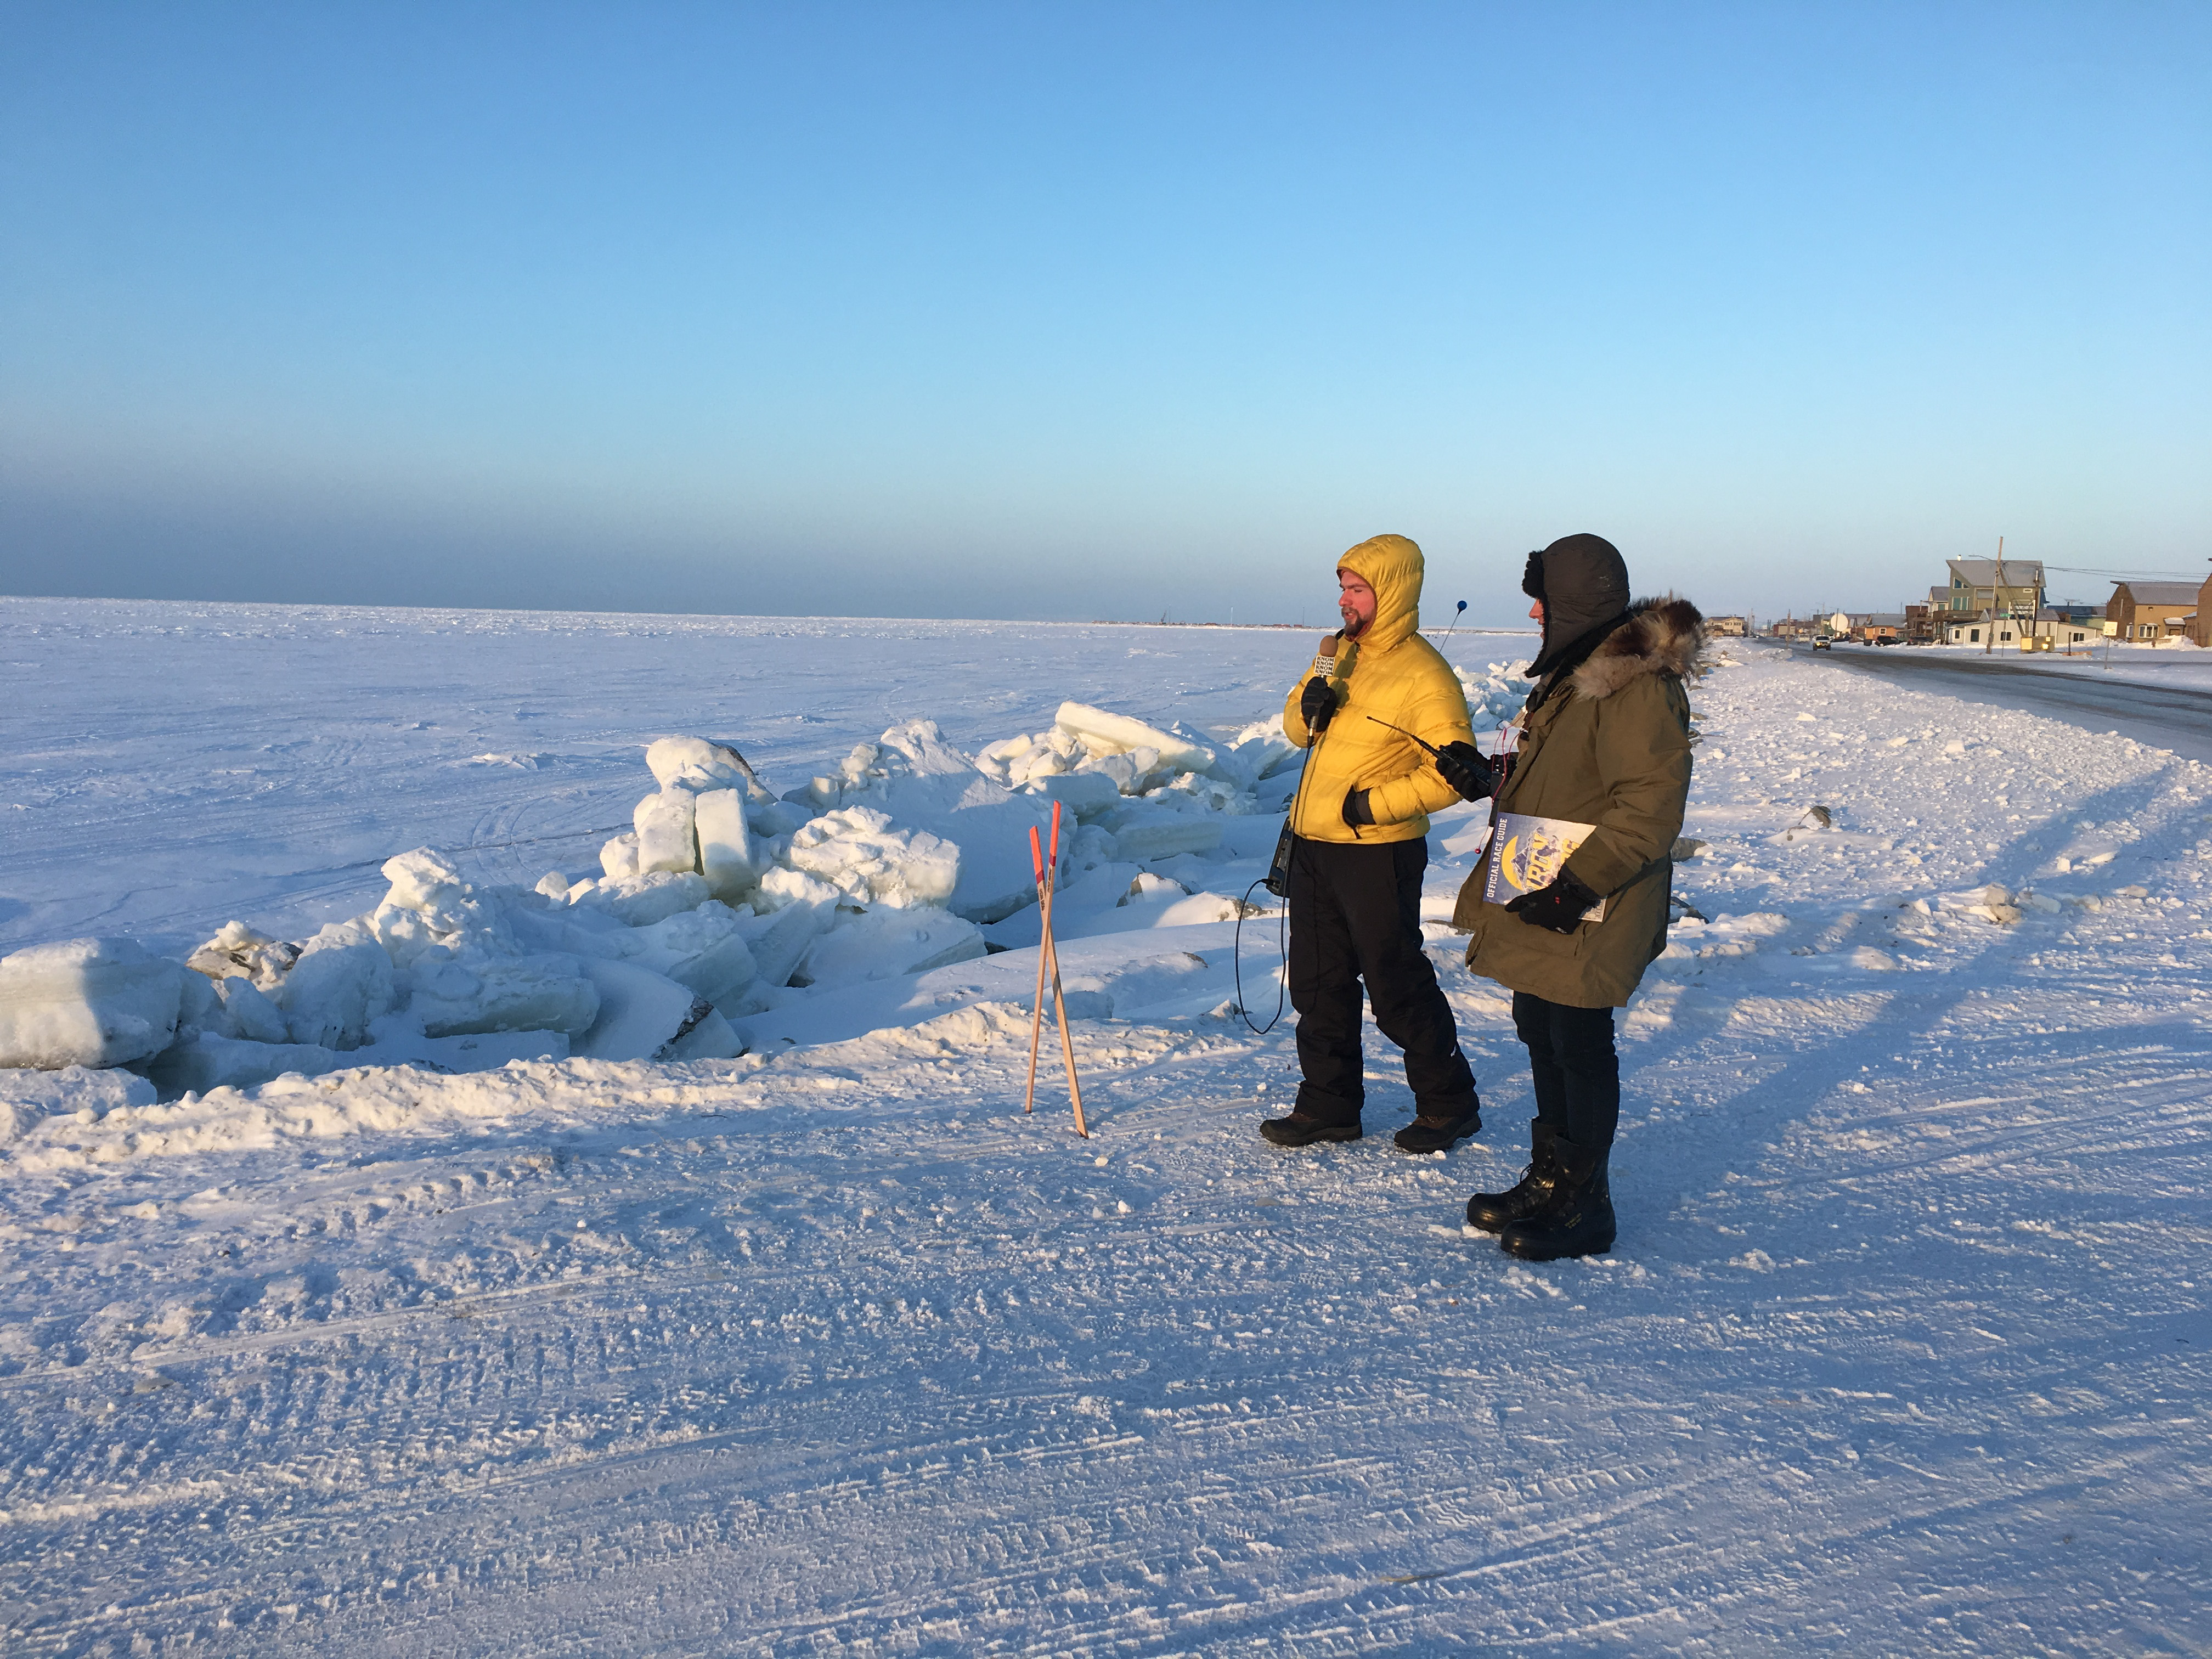 Davis Hovey and fellow reporter Tyler Stup await the arrival of the Iron Dog Snowmachine racers on the frozen Bering Sea.